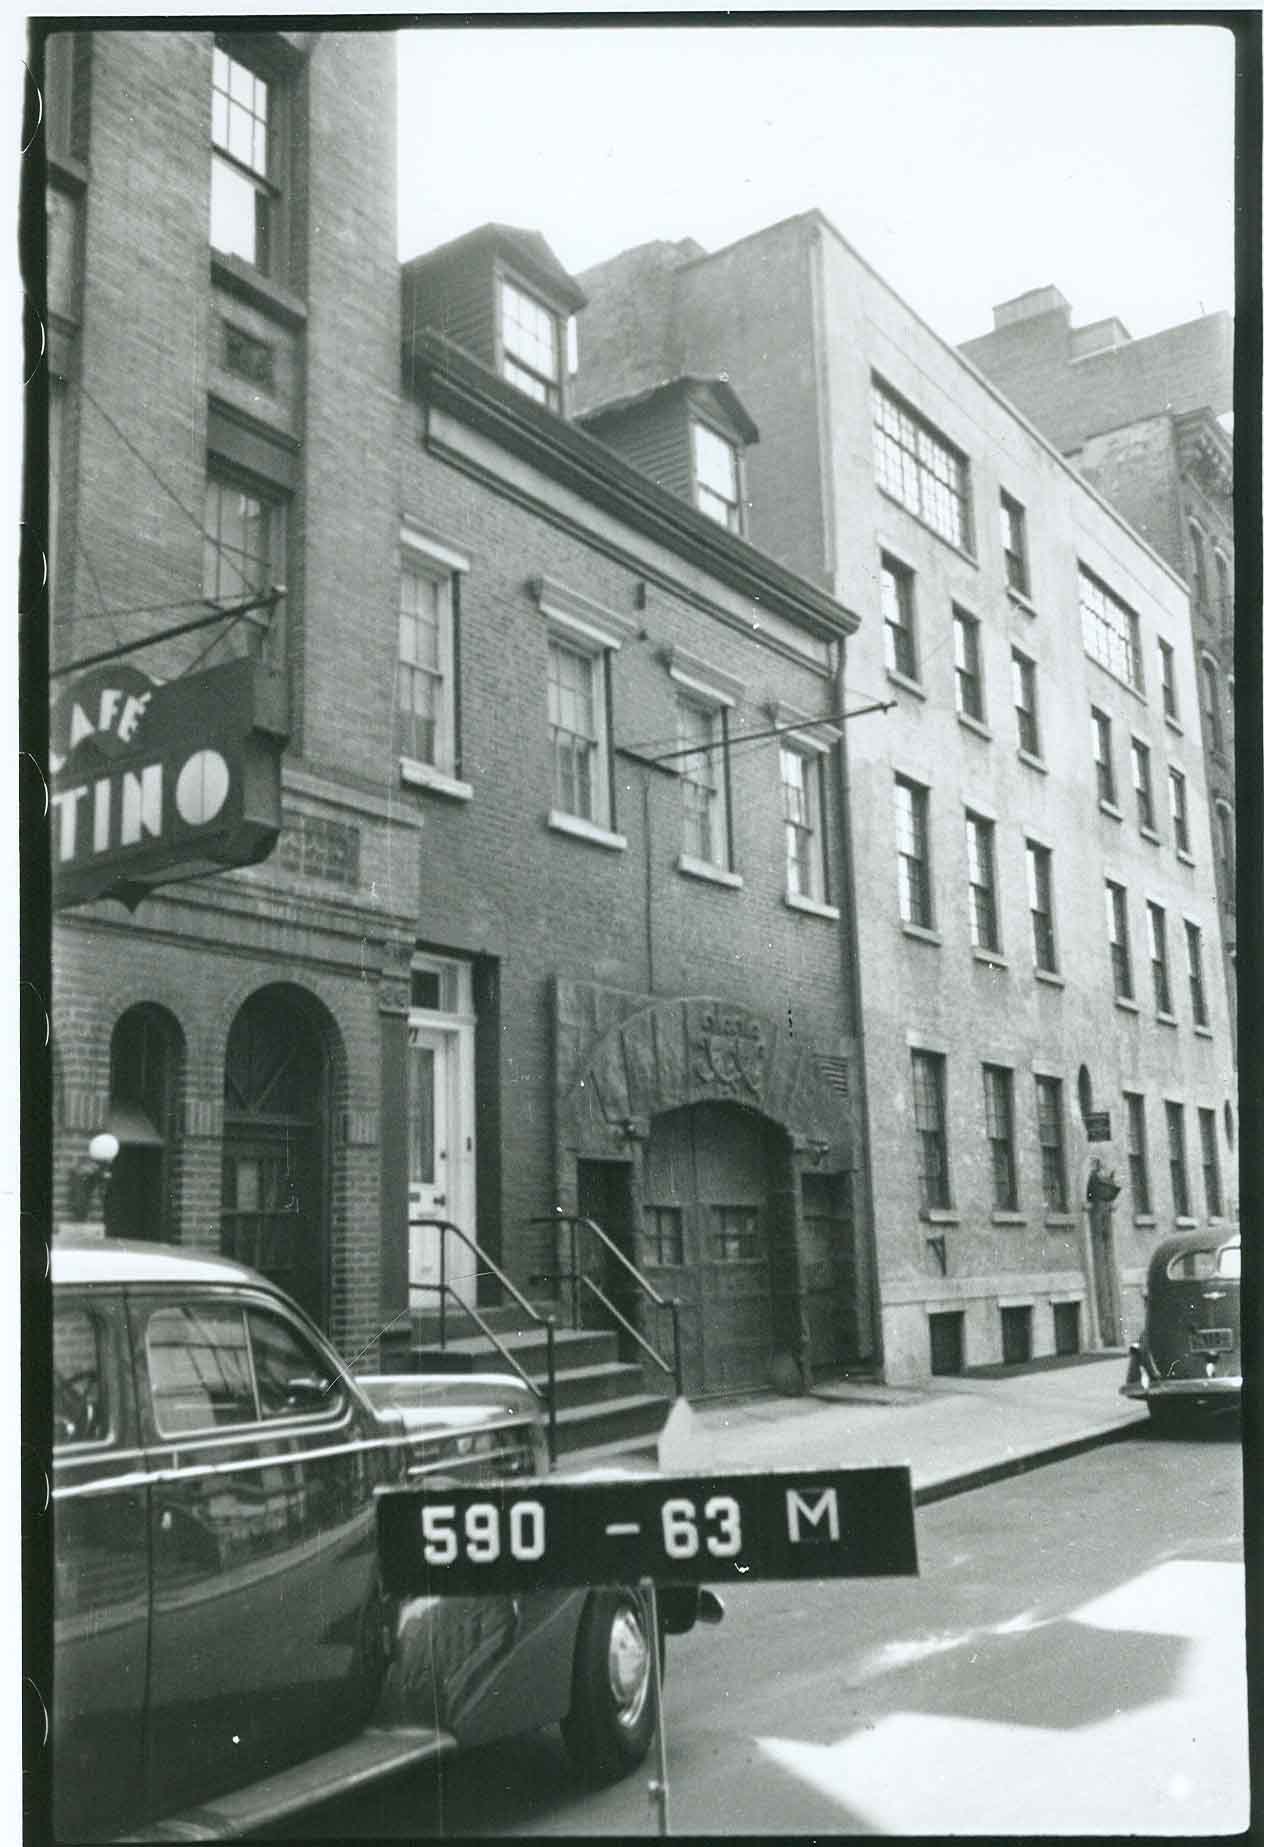 A 1940 tax photo of 17 Barrow St., provided by G.V.S.H.P.'s Andrew Berman, showing that the stucco arch above the doorway, in fact, was in place at that time. At some later point, it was painted white.